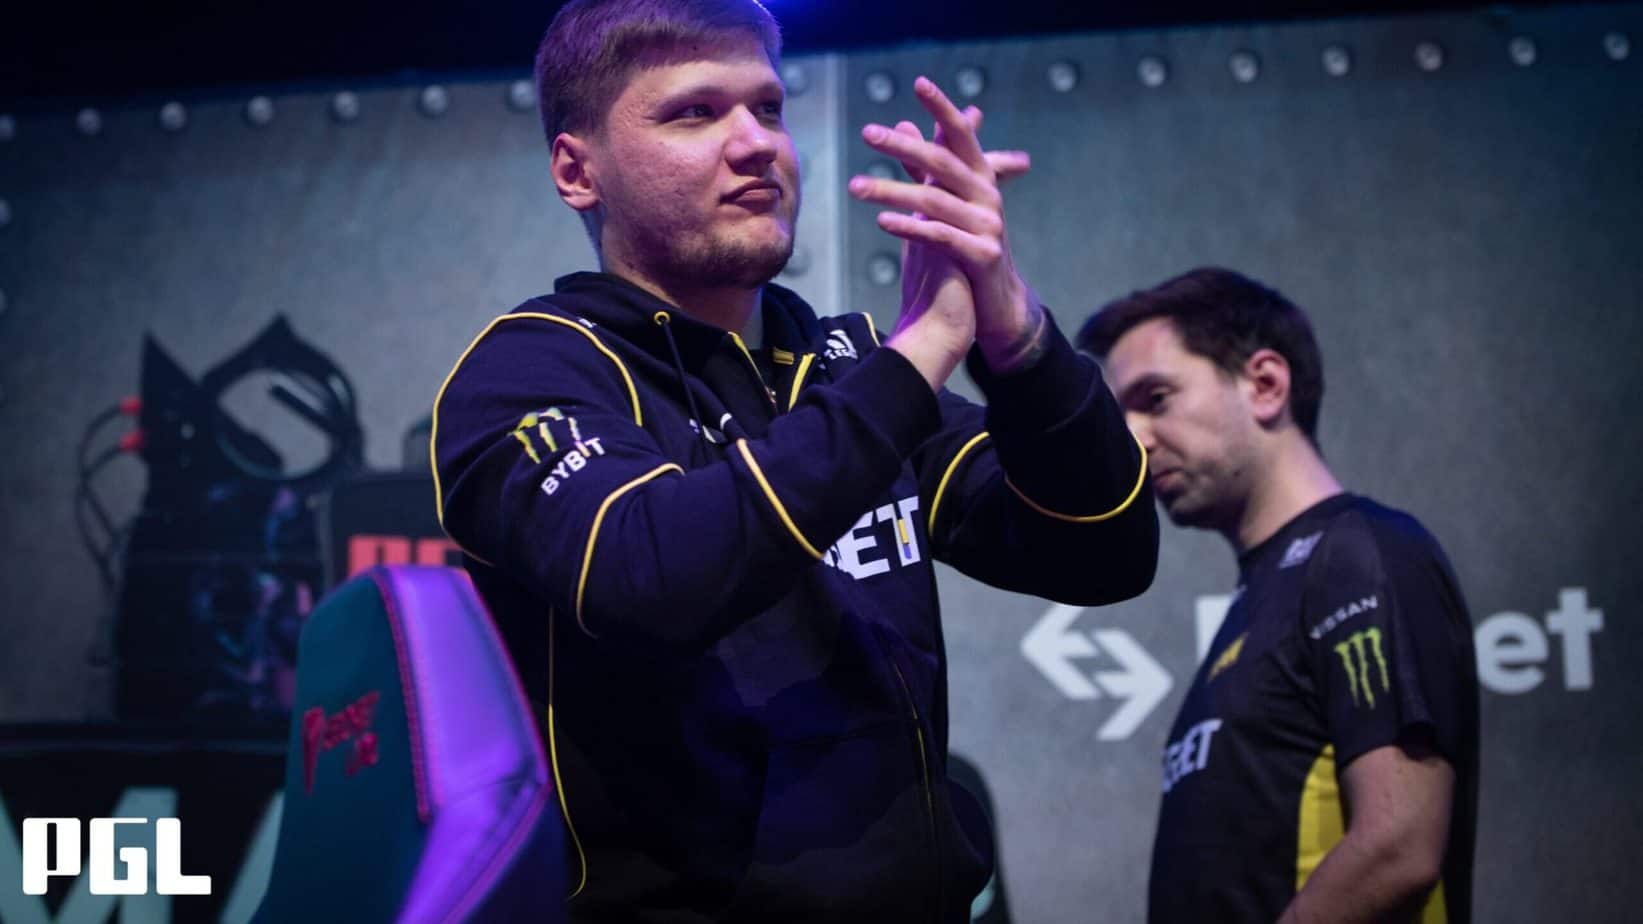 Gambit Esports vs. NaVi – Betting Odds and Preview